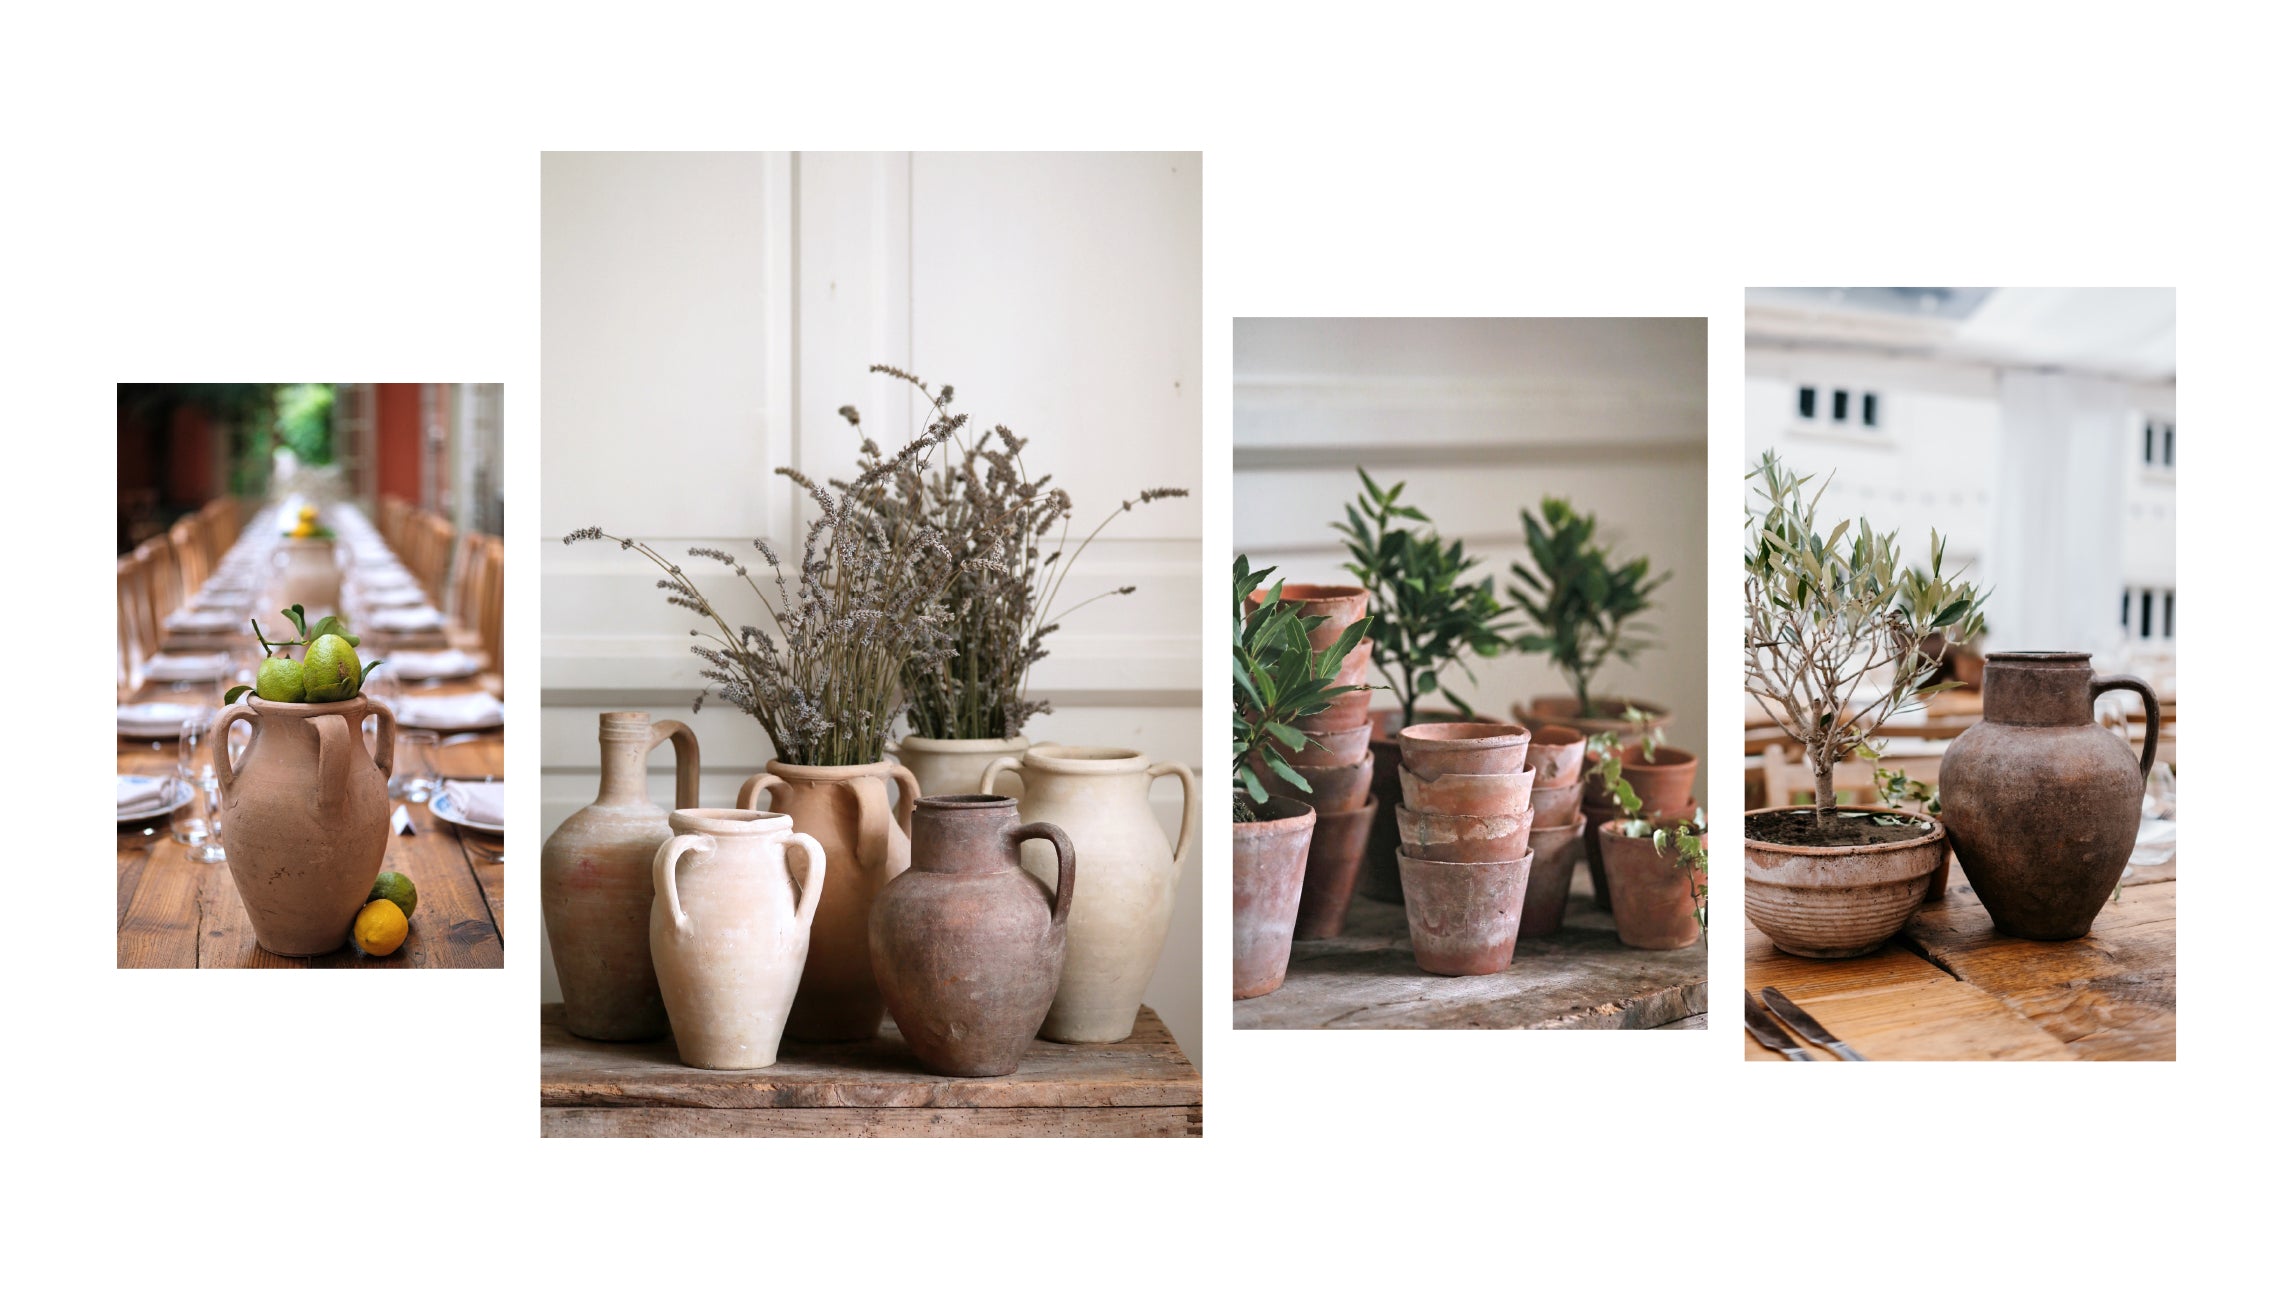 Vintage rustic terracotta vases + plant pots available for event + wedding hire